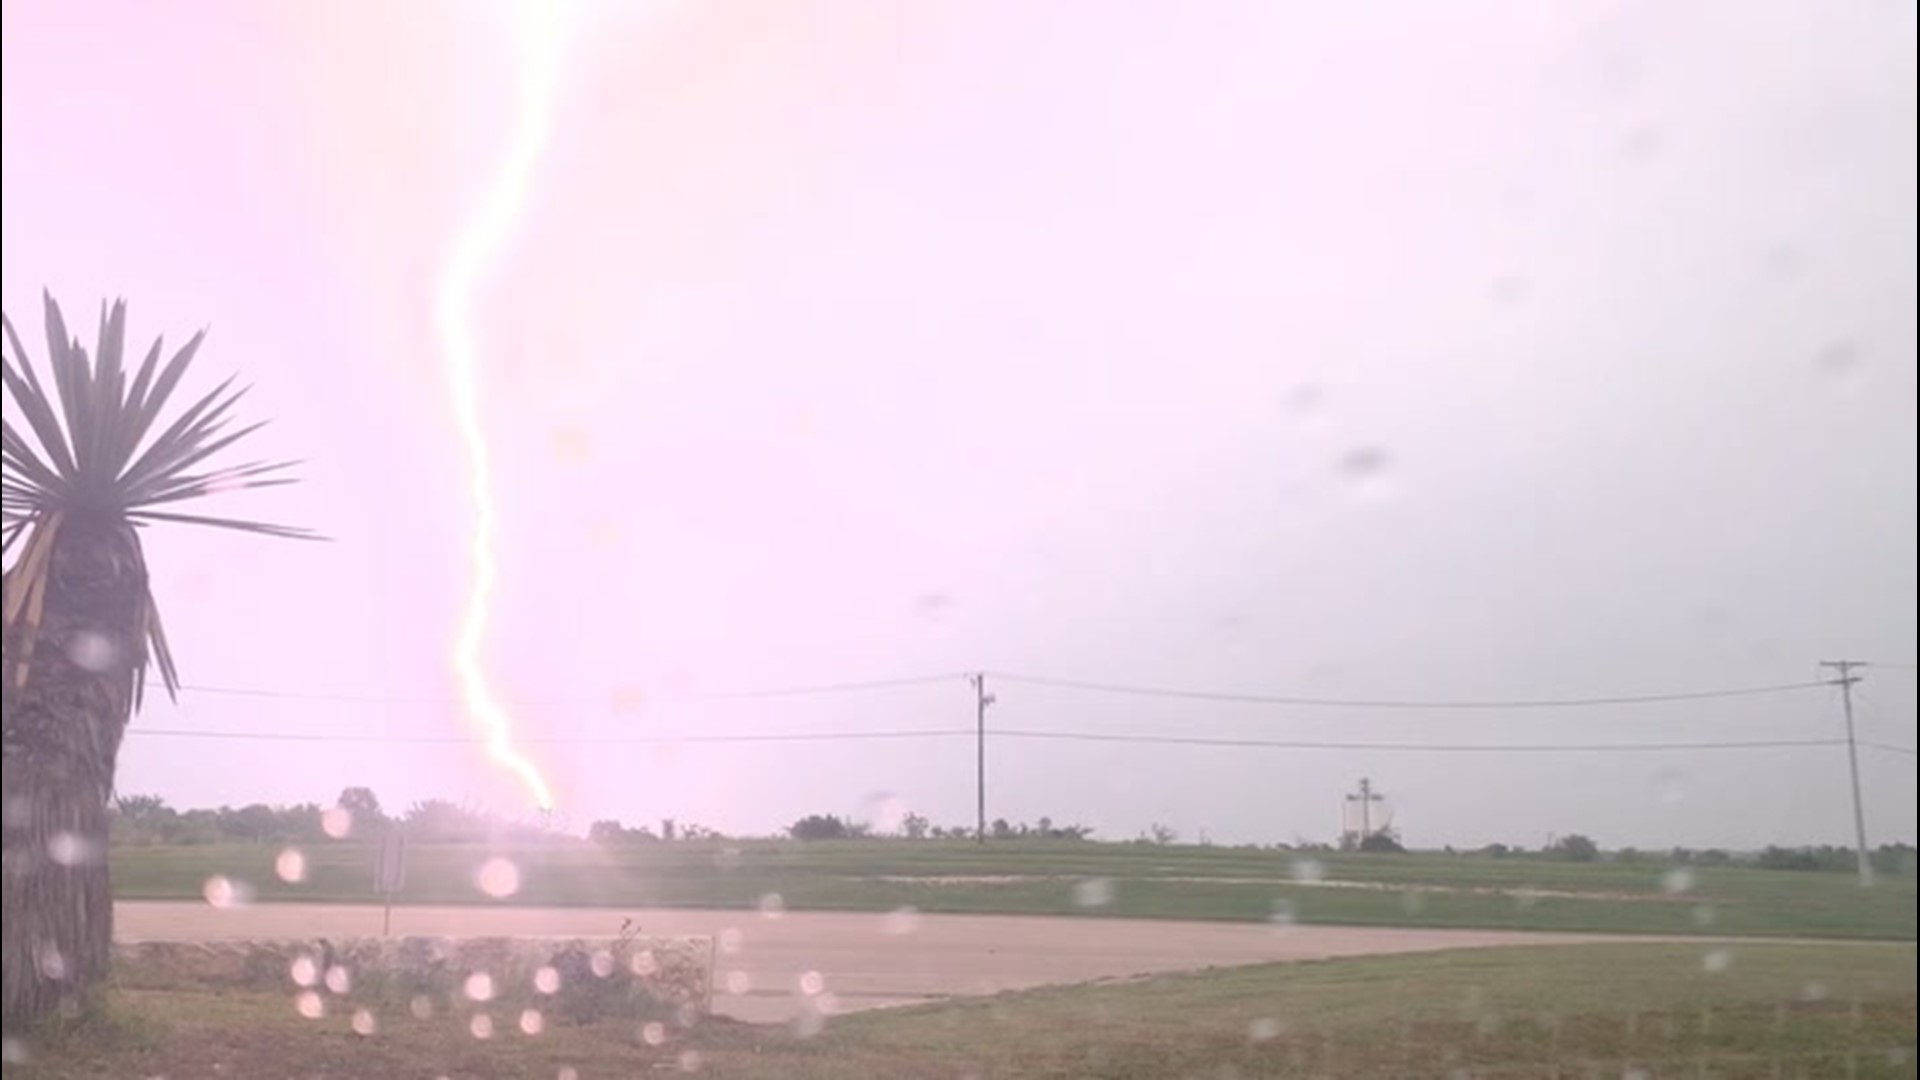 Wow! Lightning bolt flashes in slow motion 